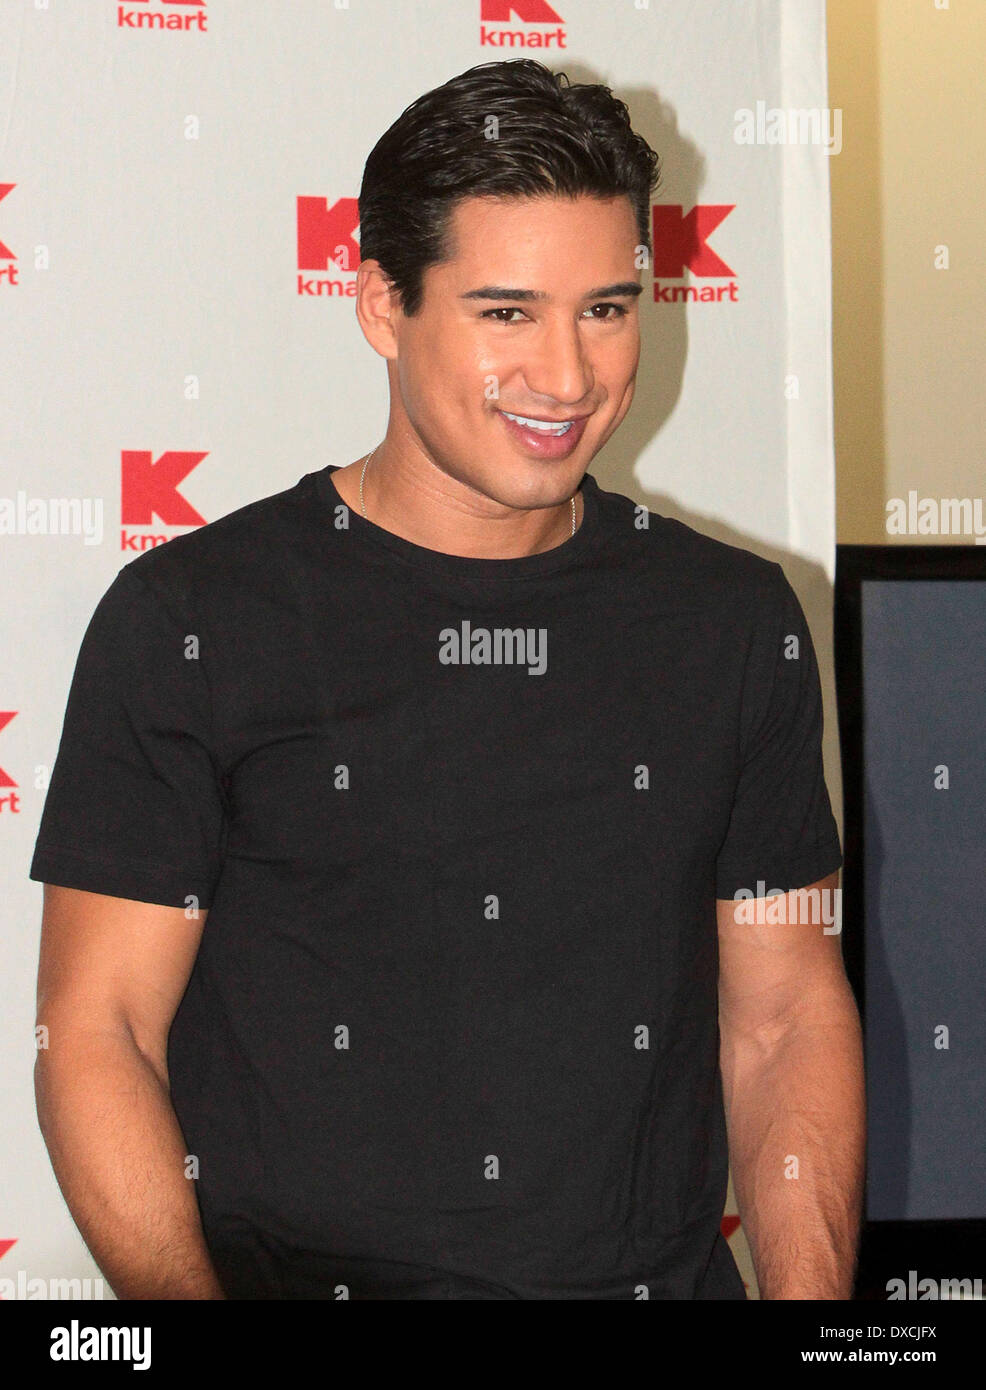 Mario Lopez promotes his new line of underwear 'MaLo' at Kmart in